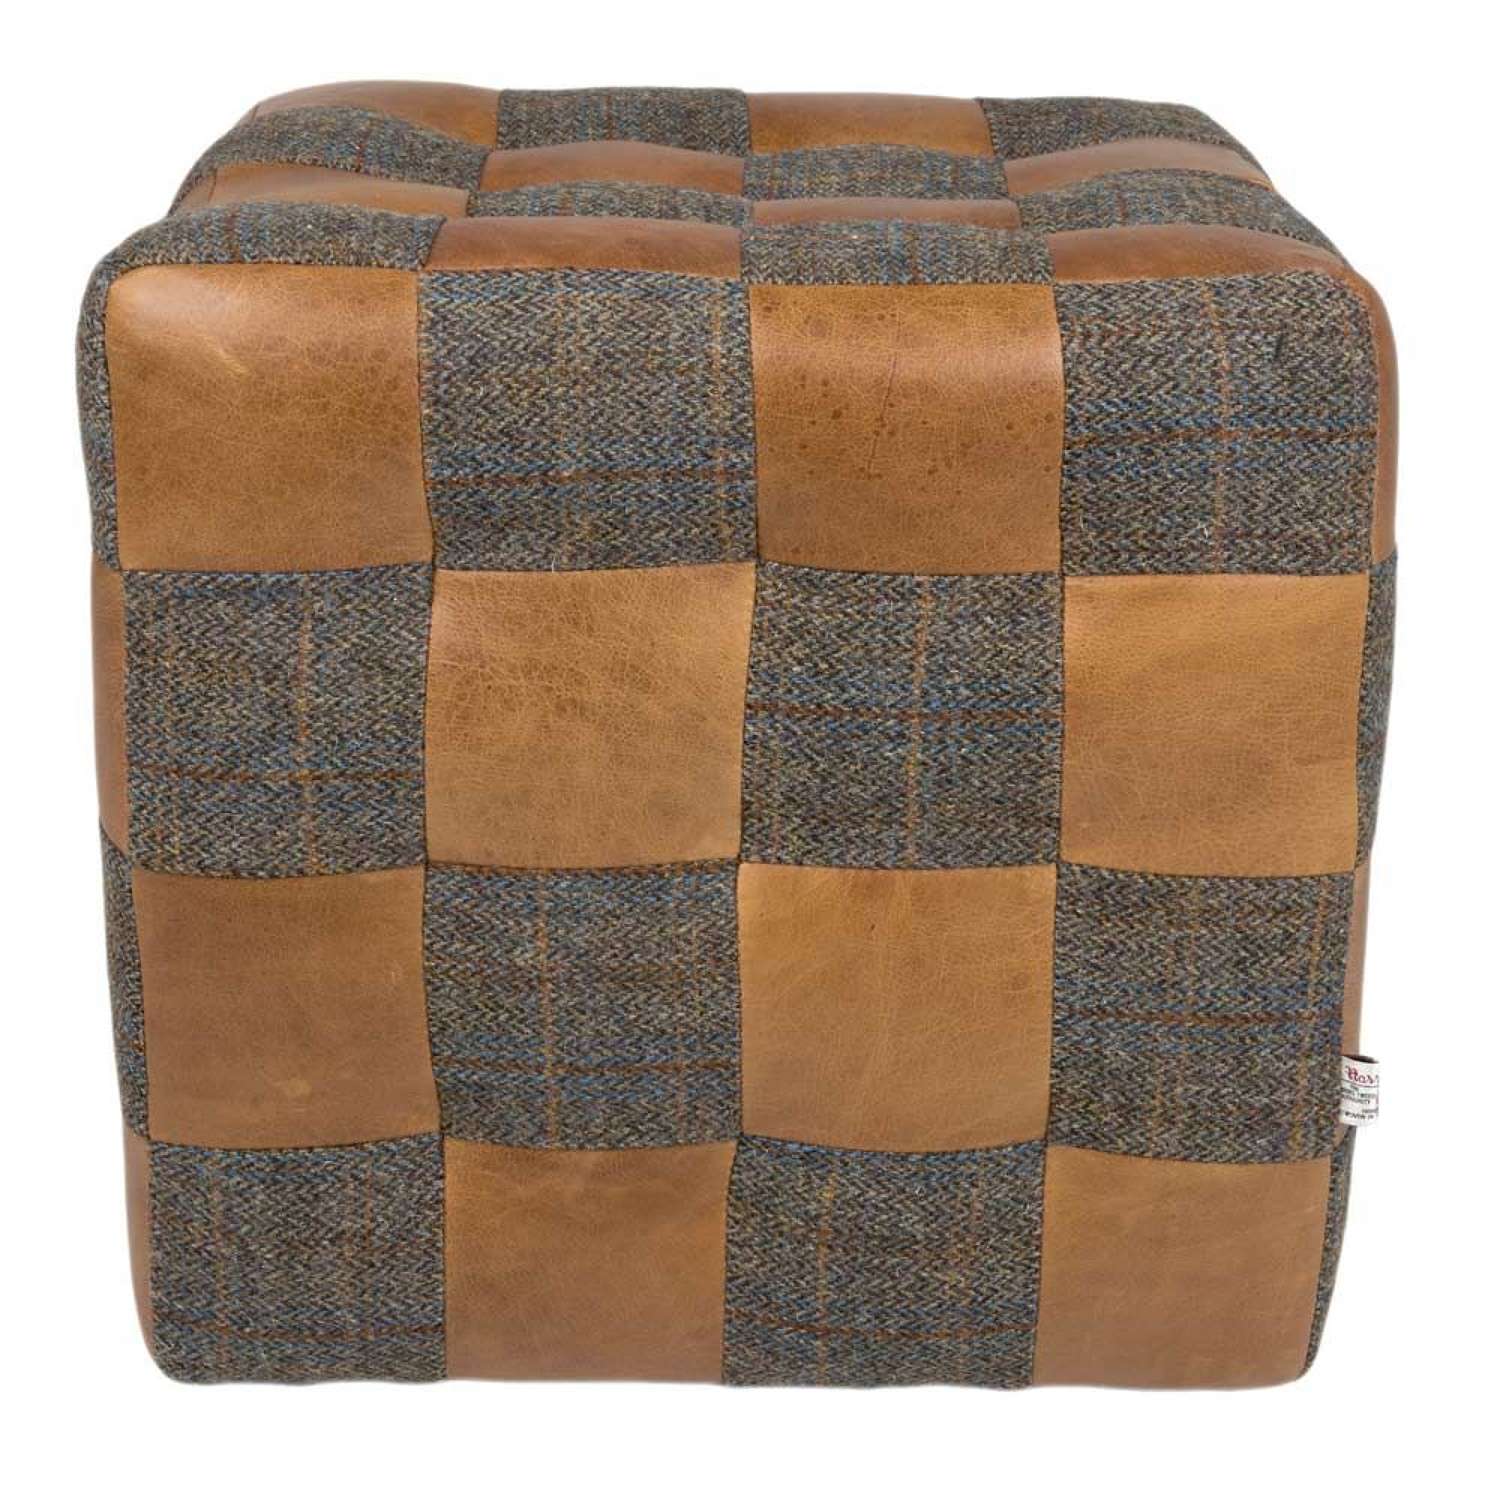 Uist Night Harris Tweed and Cerato Leather Patchwork Footstool